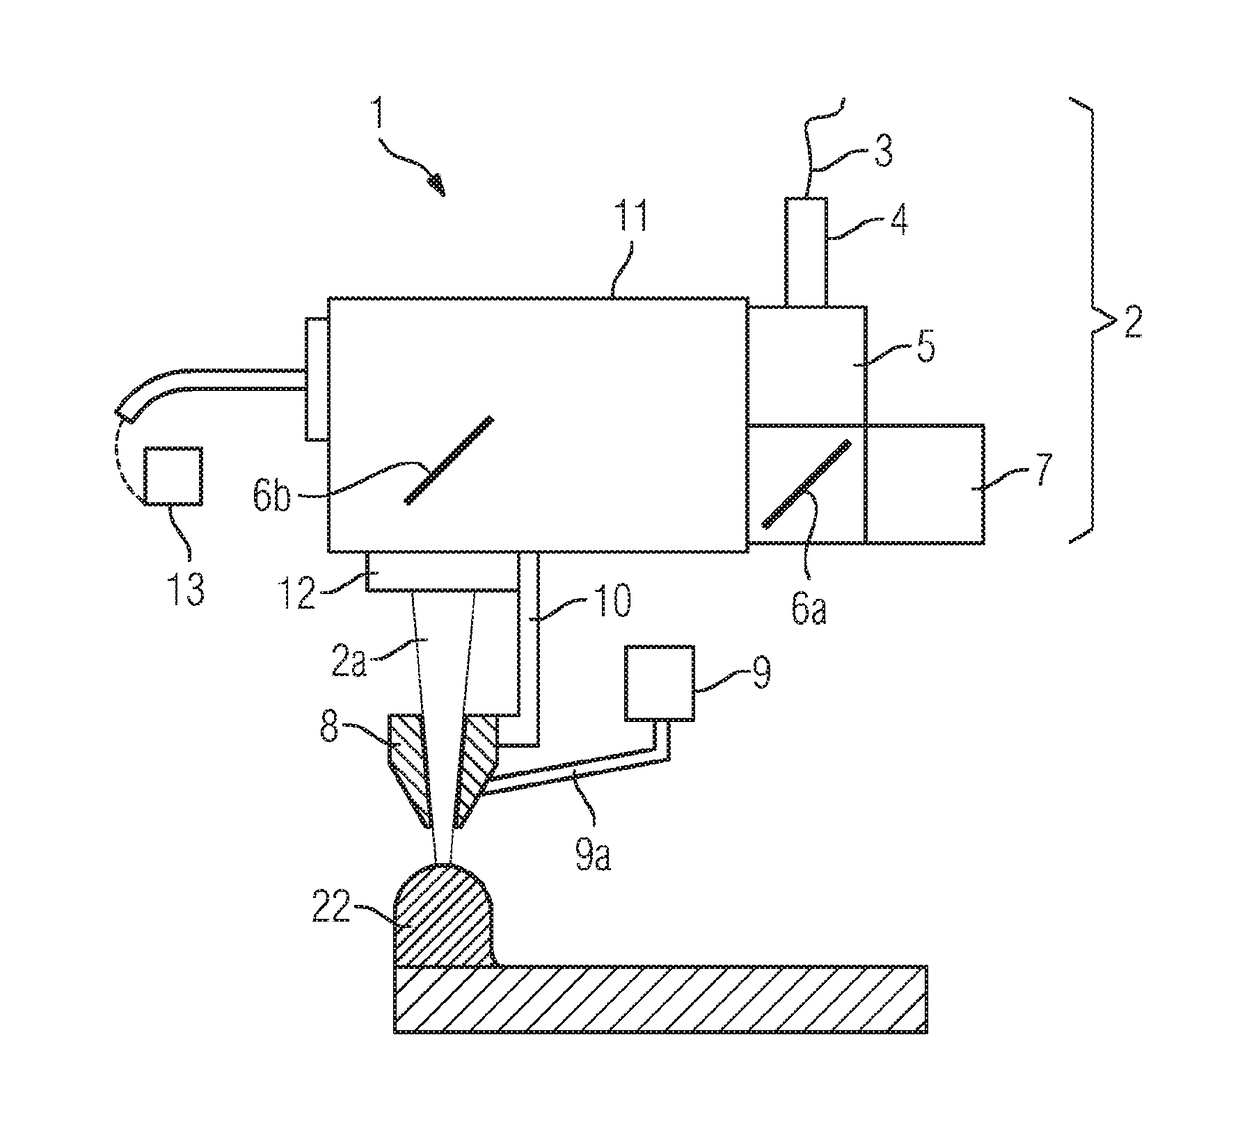 Apparatus for laser hardfacing using a wobbling movement